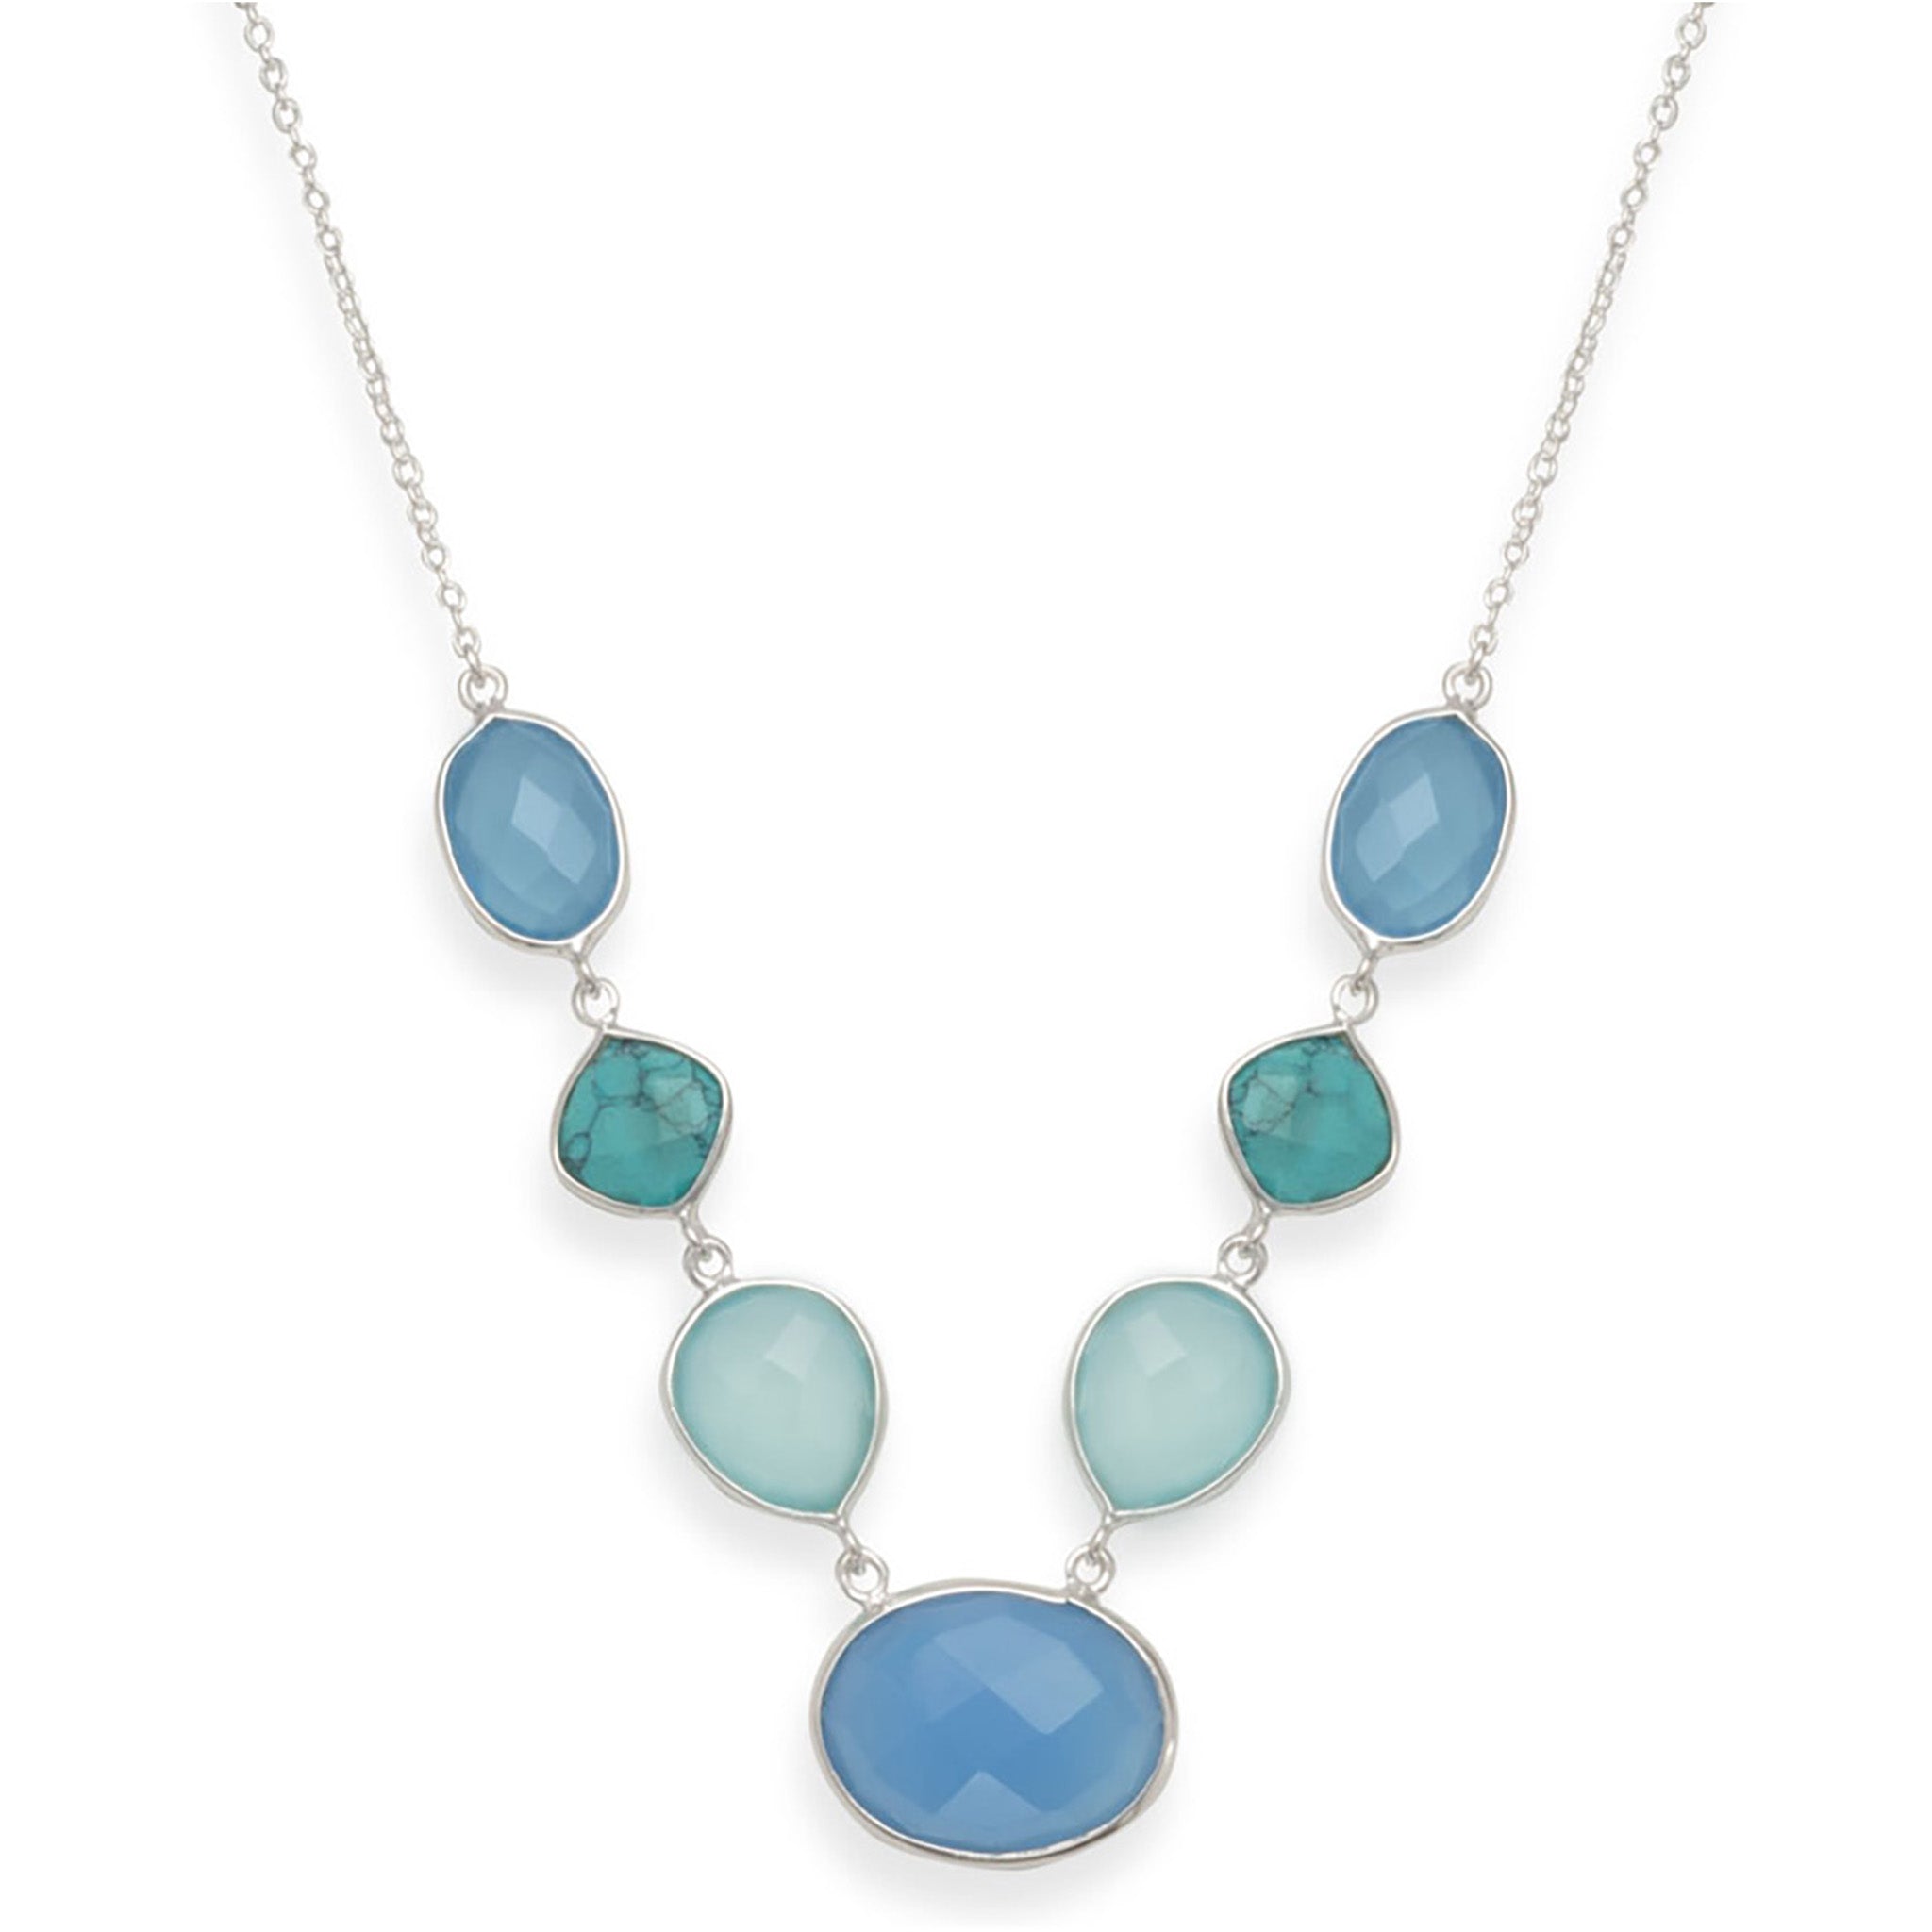 Turquoise and Chalcedony Necklace